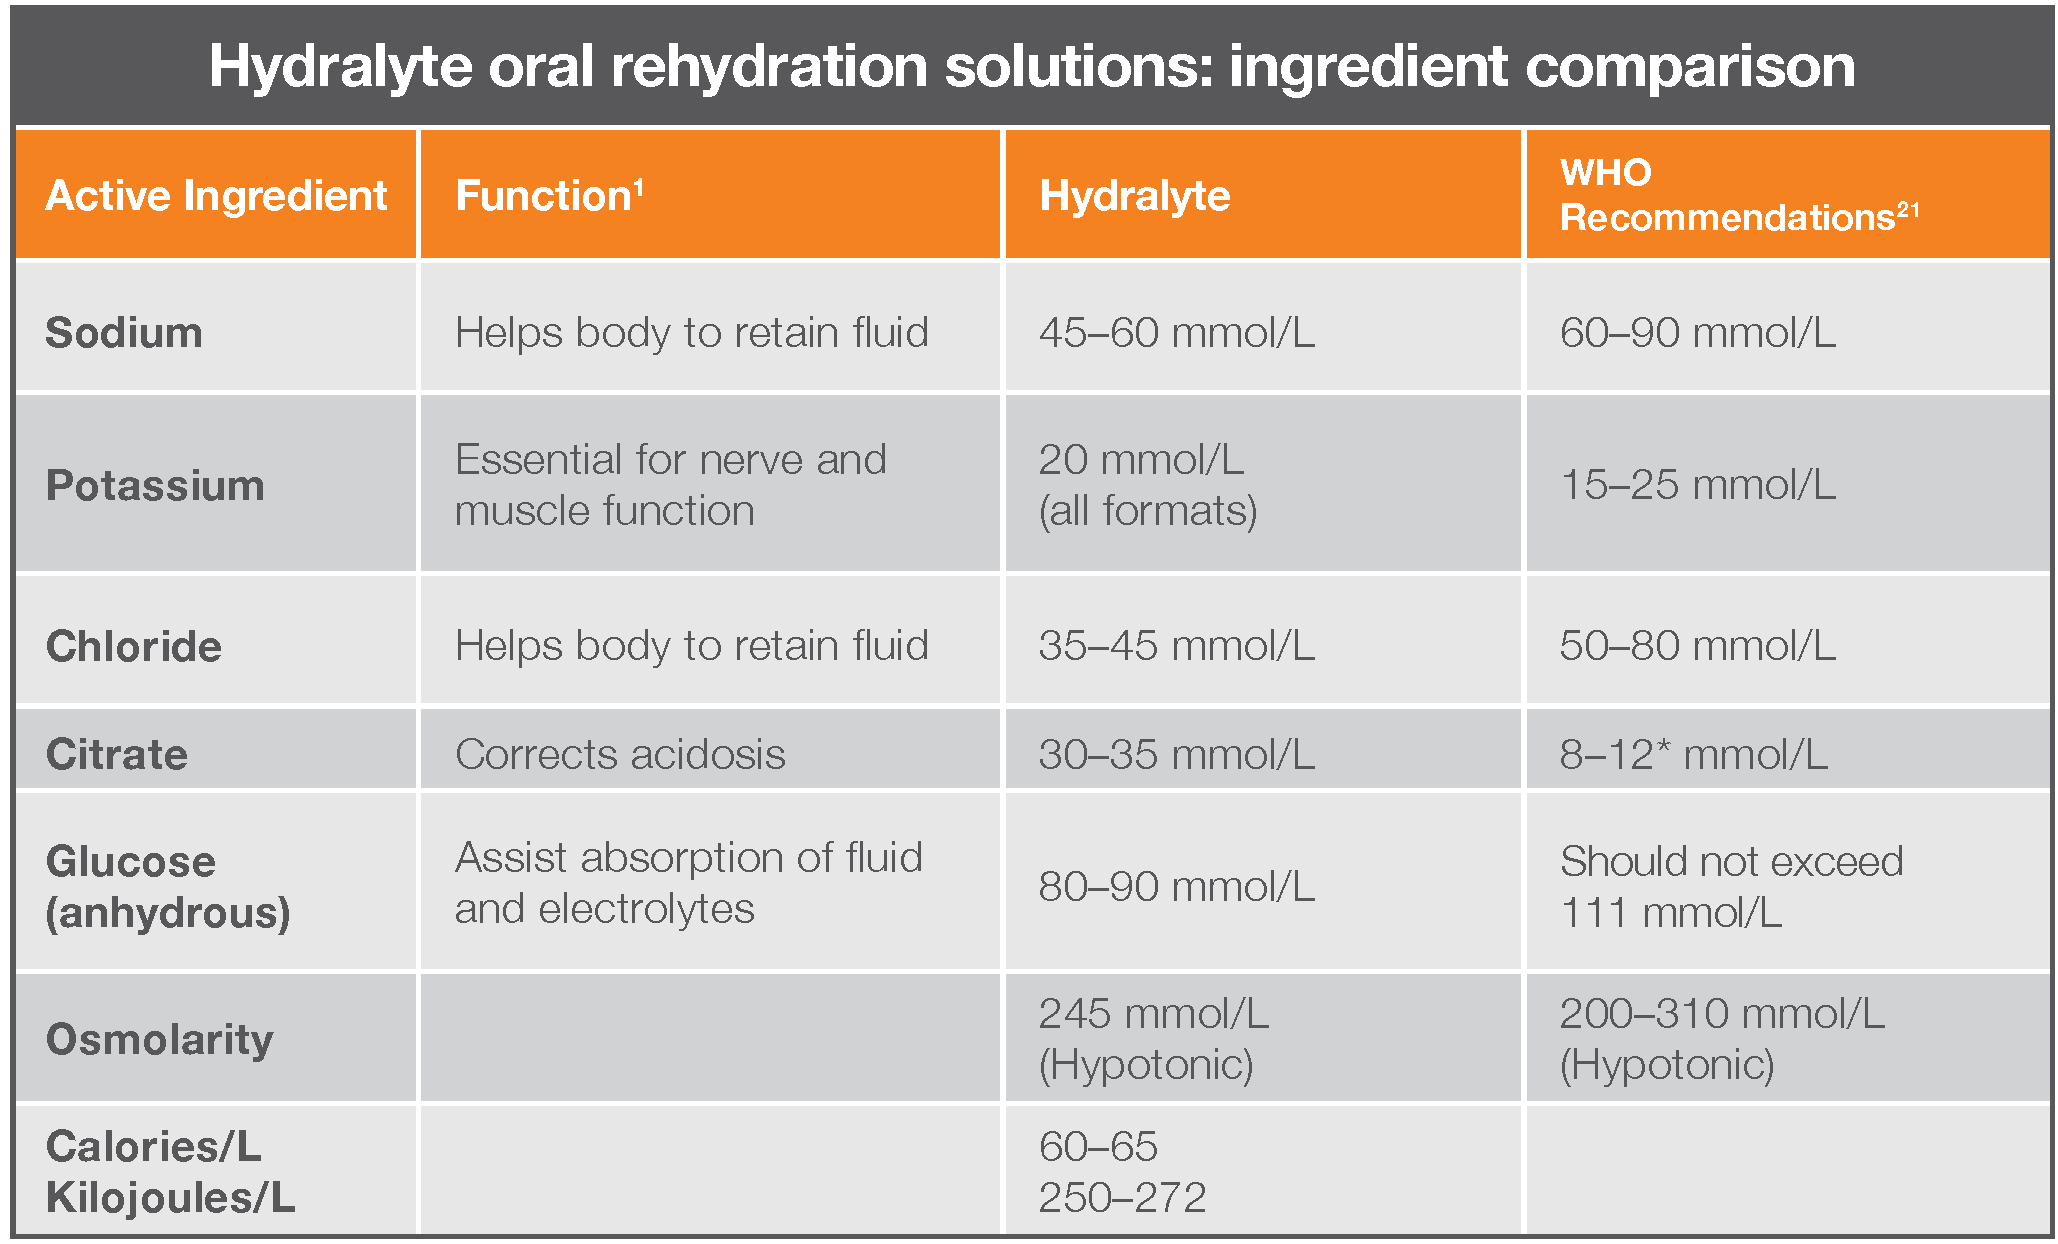 Hydralyte oral rehydration solutions: ingredient comparison